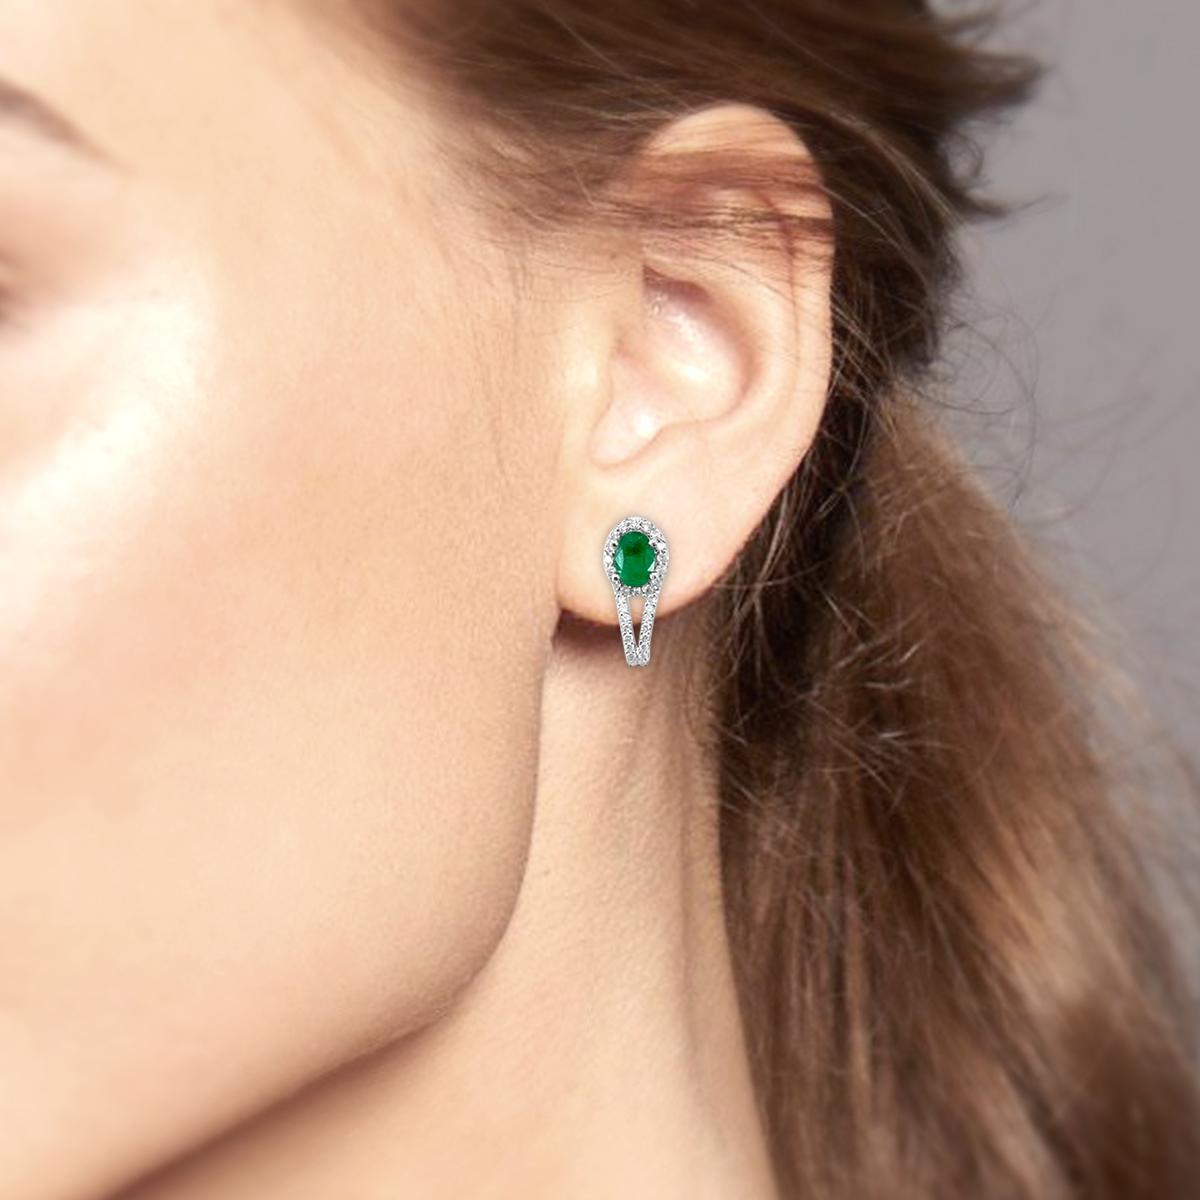 Oval Cut 18K White Gold 1.29cts Emerald and Diamond Earring, Style# TS1020E